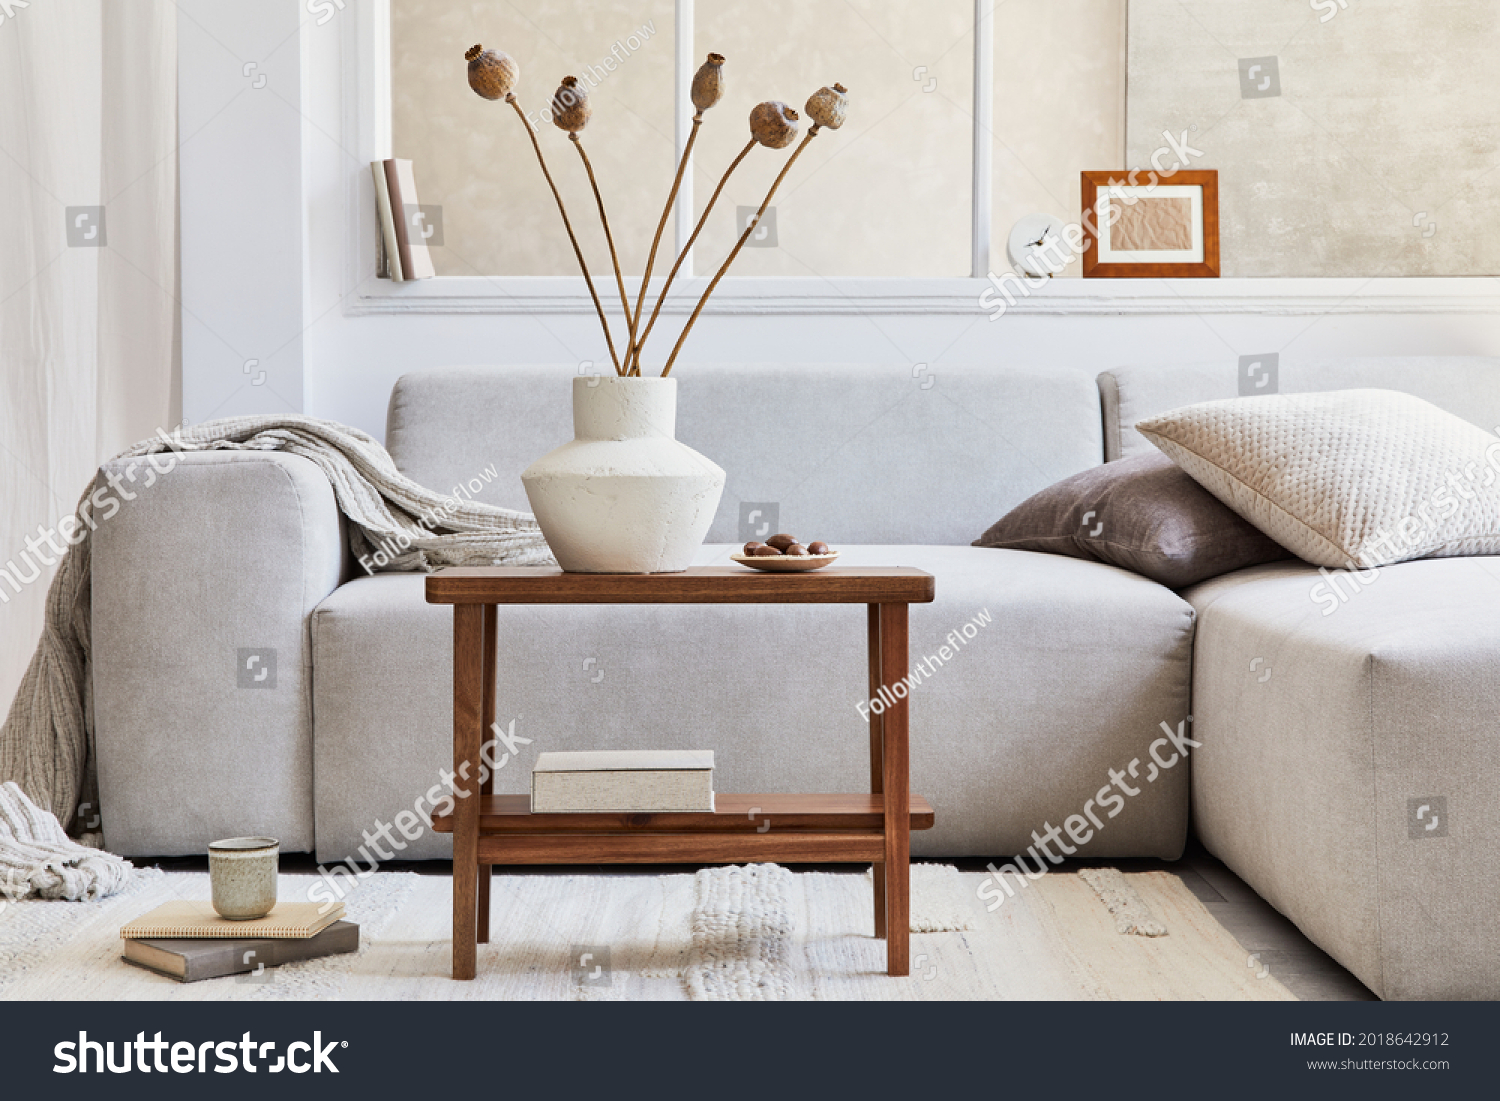 Creative composition of stylish living room interior with grey corner sofa, window, wooden coffee table, vase with dried flowers and personal accessories. Beige neutral colors. Template. #2018642912